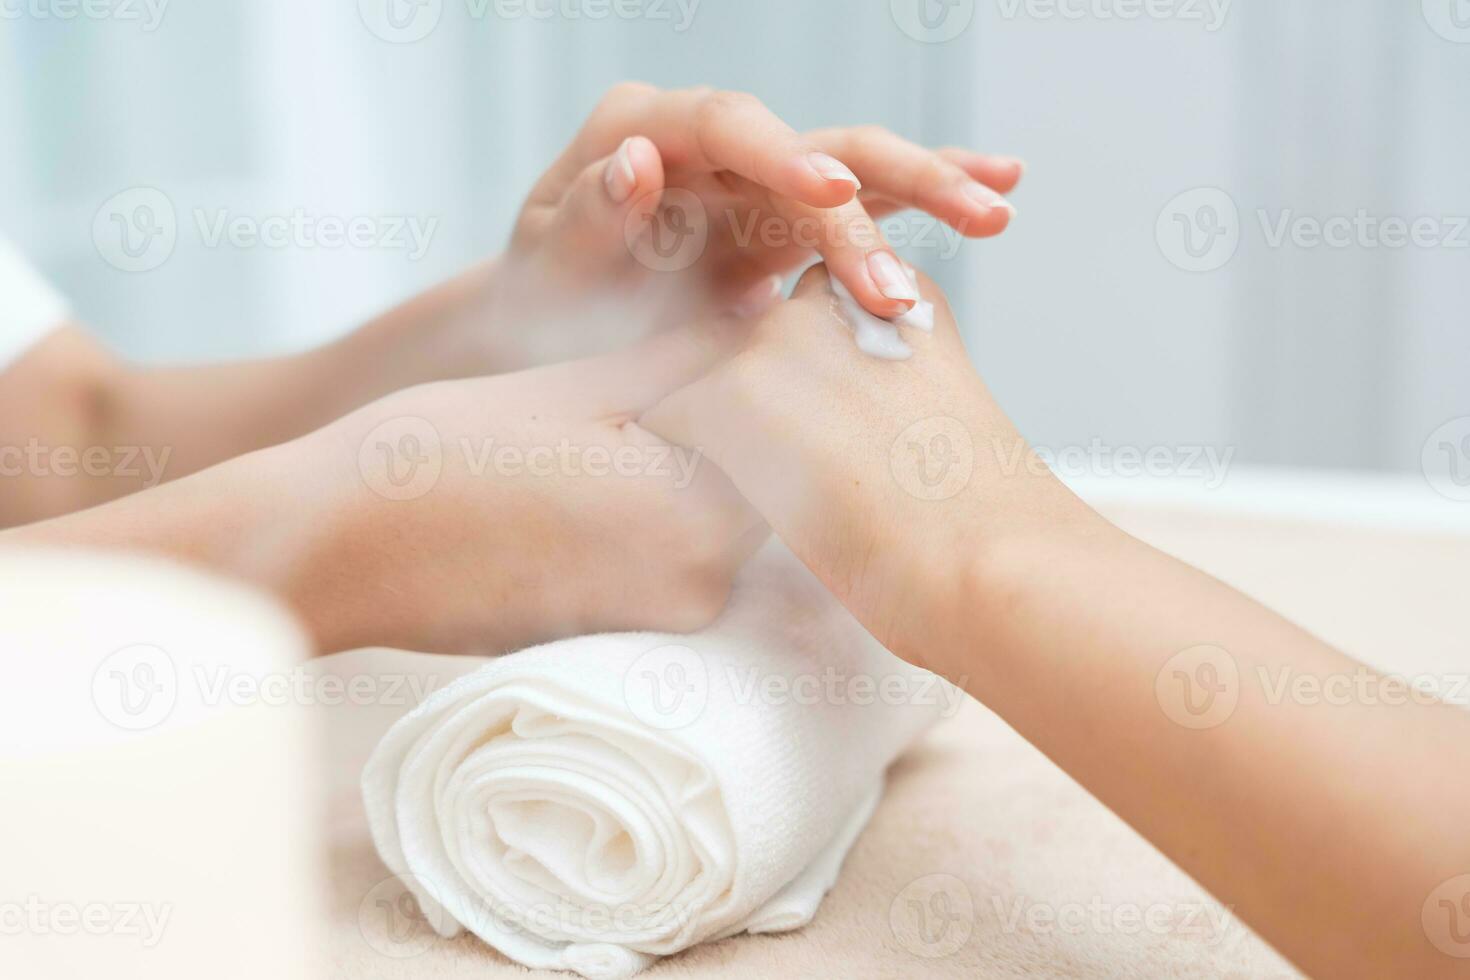 https://static.vecteezy.com/system/resources/previews/024/083/504/non_2x/spa-and-treatment-skin-hand-woman-applying-organic-moisturizing-hand-cream-hand-skin-care-concept-winter-female-skin-protection-beautiful-woman-skin-care-with-hand-cream-lotion-on-hands-photo.jpg